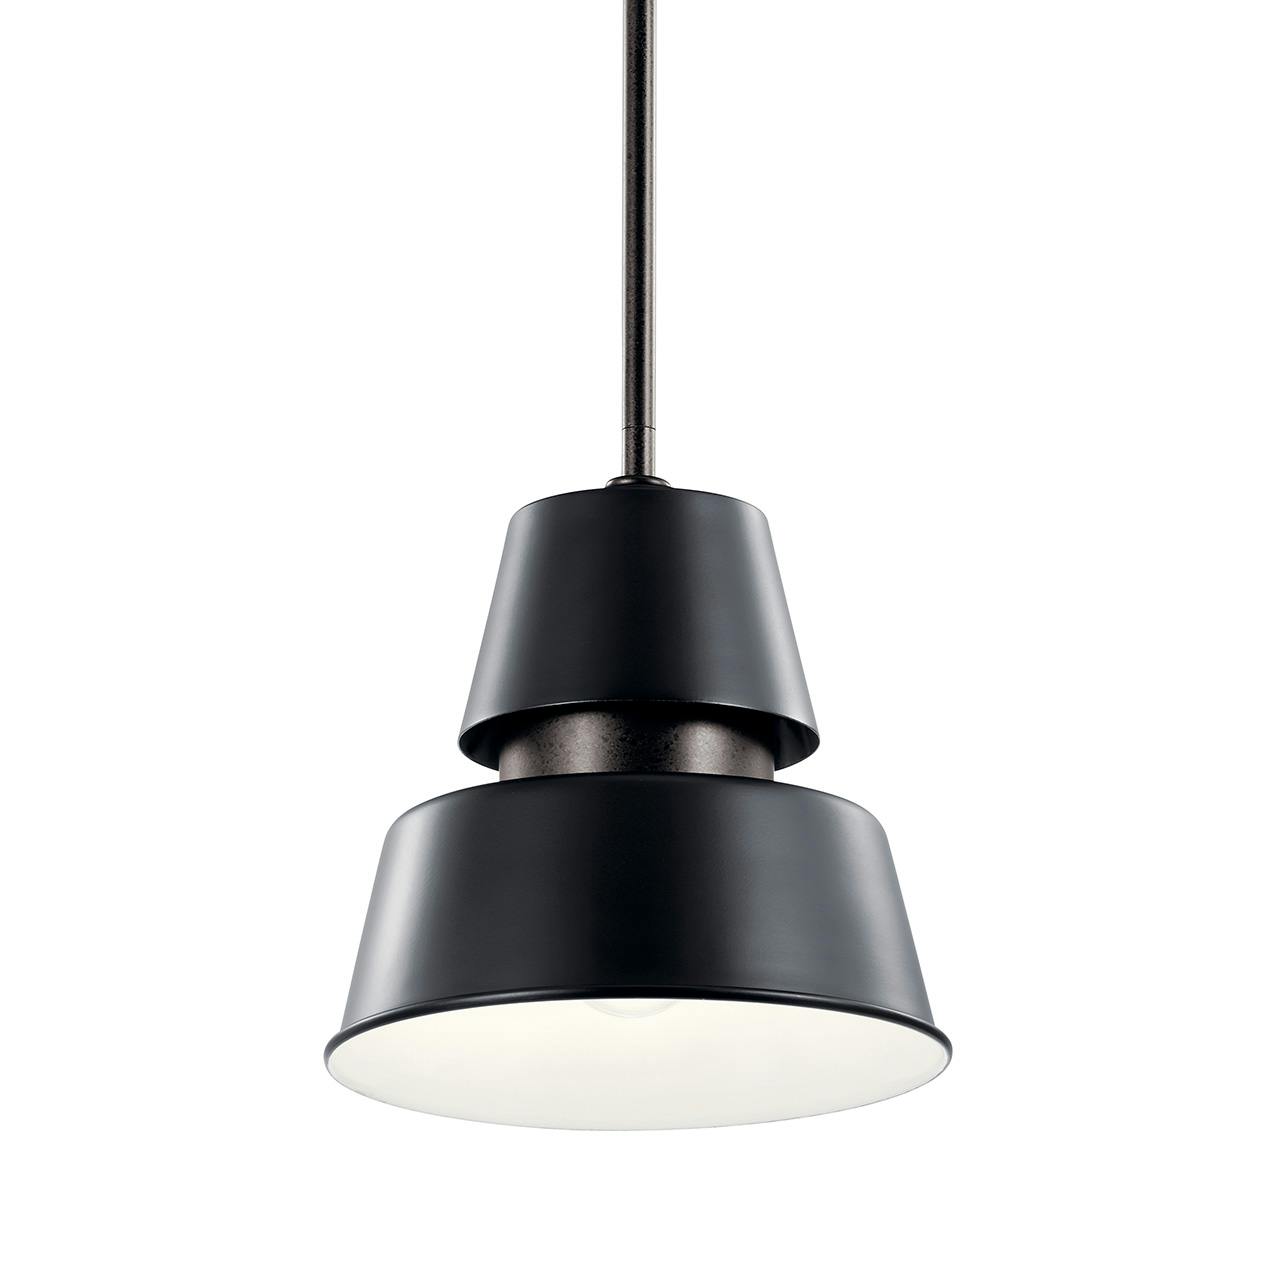 Lozano 9.5" 1 Light Pendant Black without the canopy on a white background